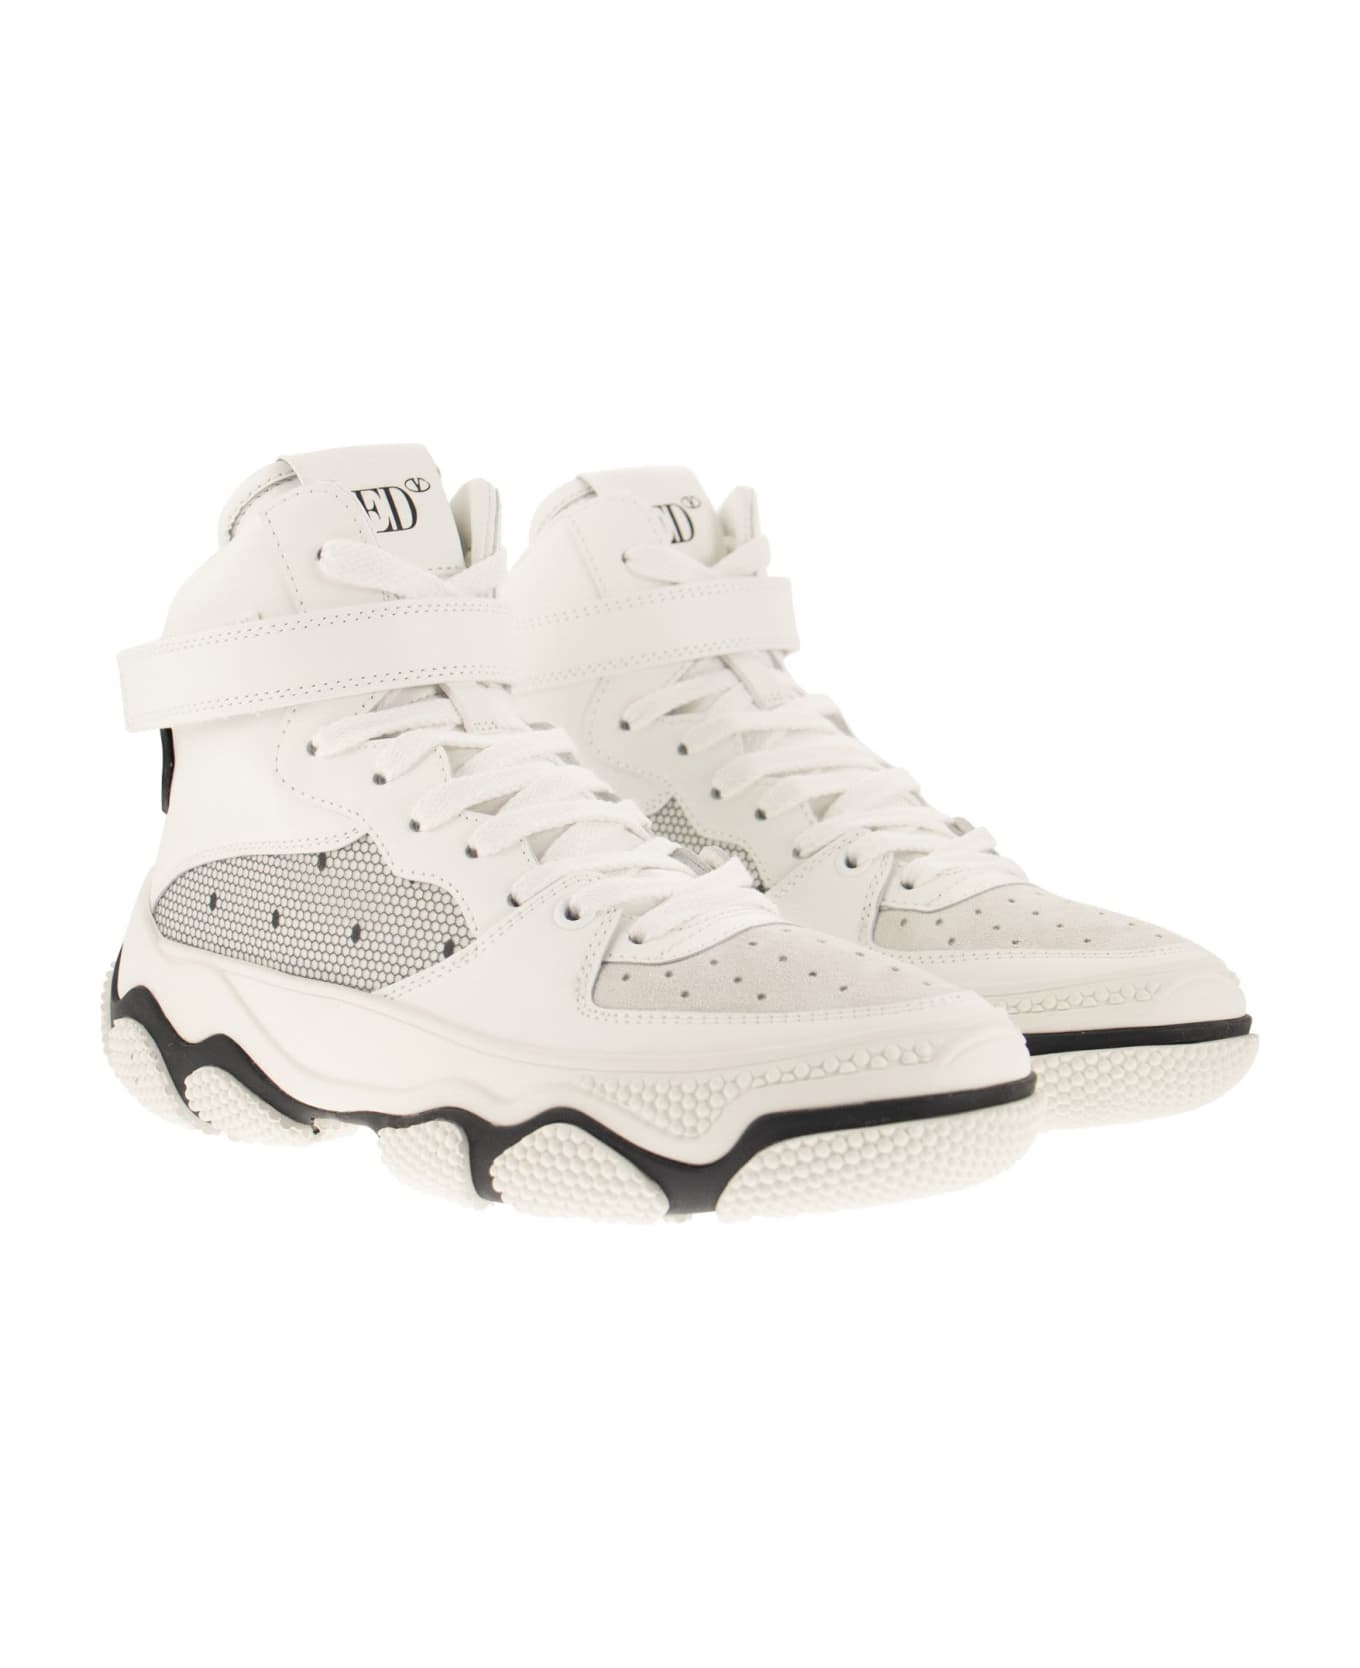 RED Valentino Glam Run Lace Sneakers - White スニーカー